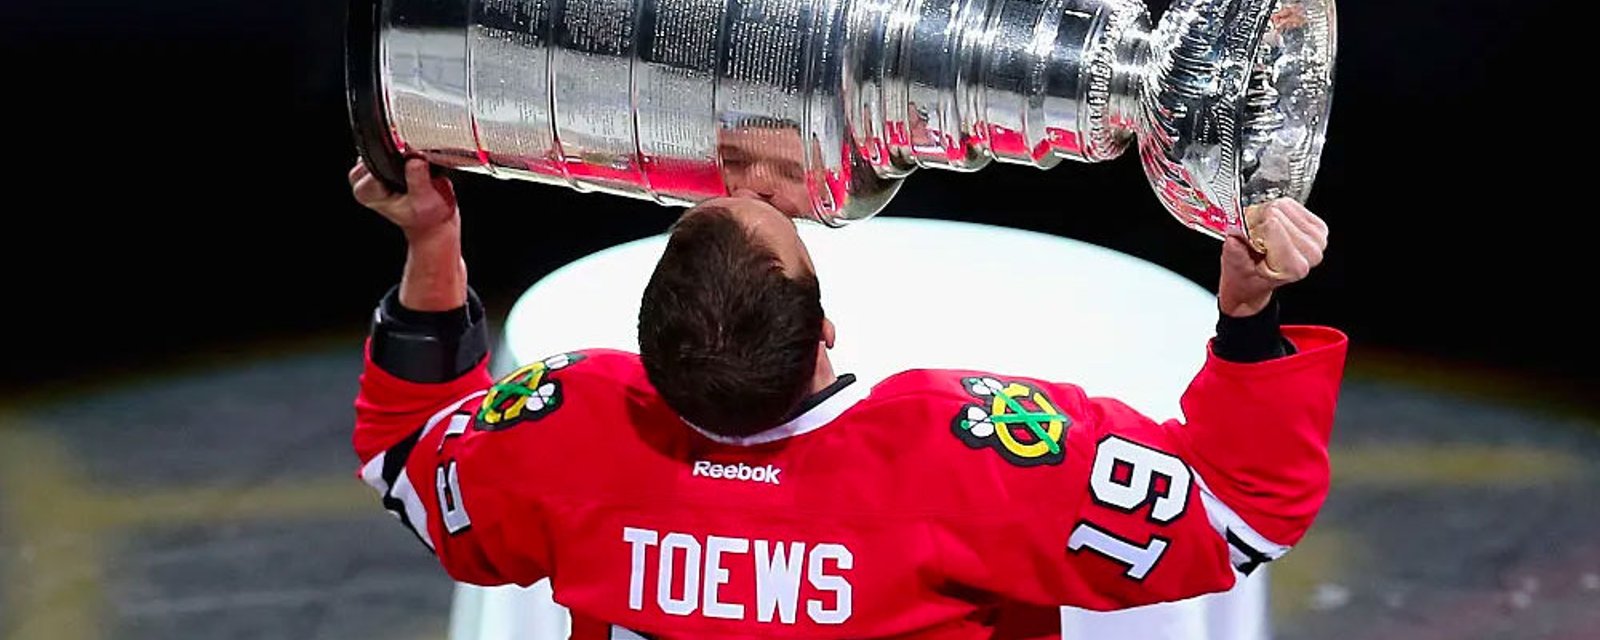 Reports that Jonathan Toews' NHL career is over